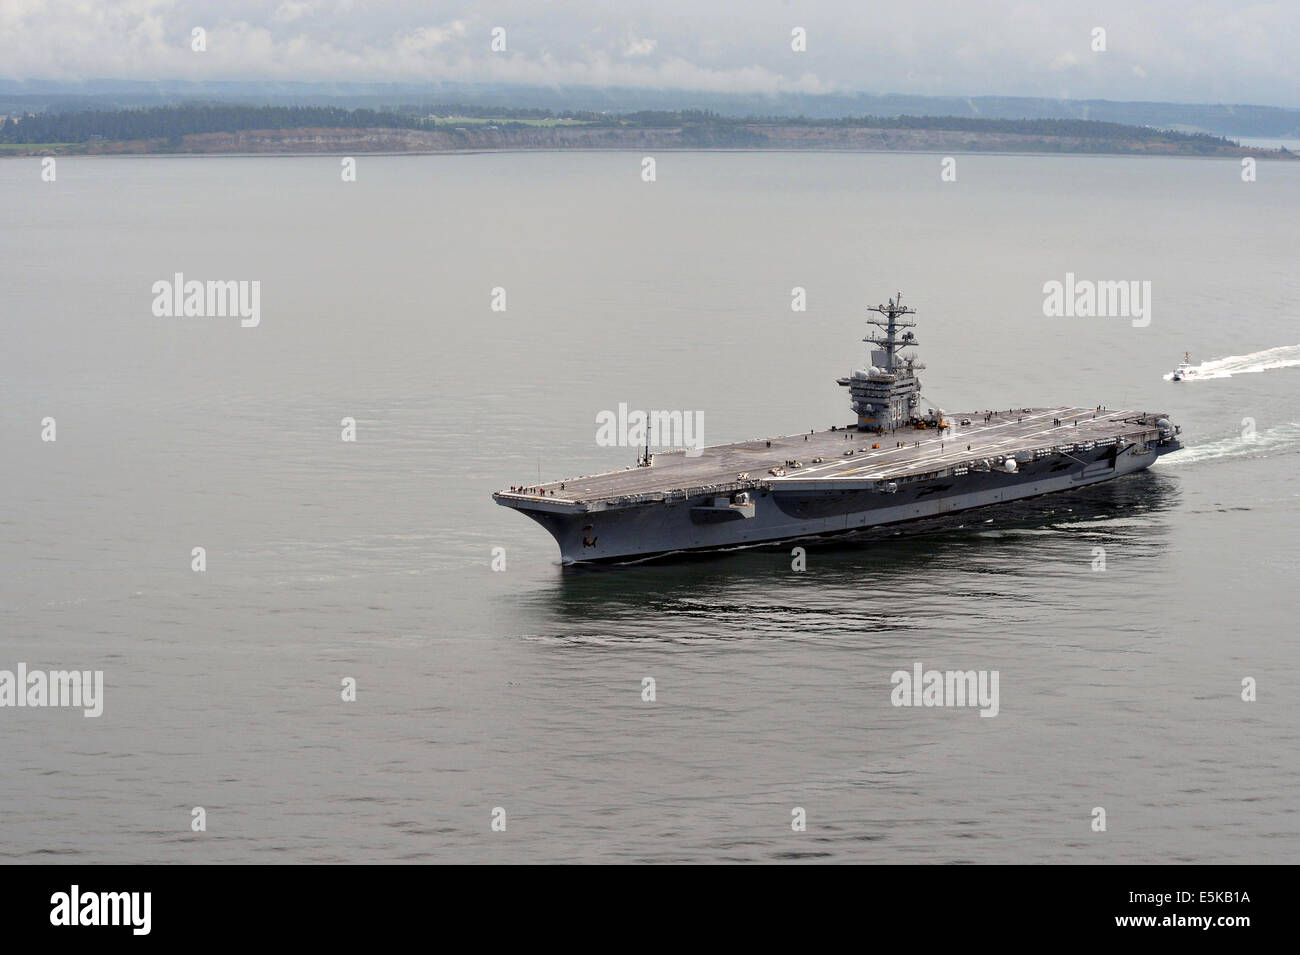 US Navy nuclear aircraft carrier USS Nimitz cruises in the Strait of Juan de Fuca during family day June 13, 2014 off the Olympic Peninsula, Washington. Stock Photo